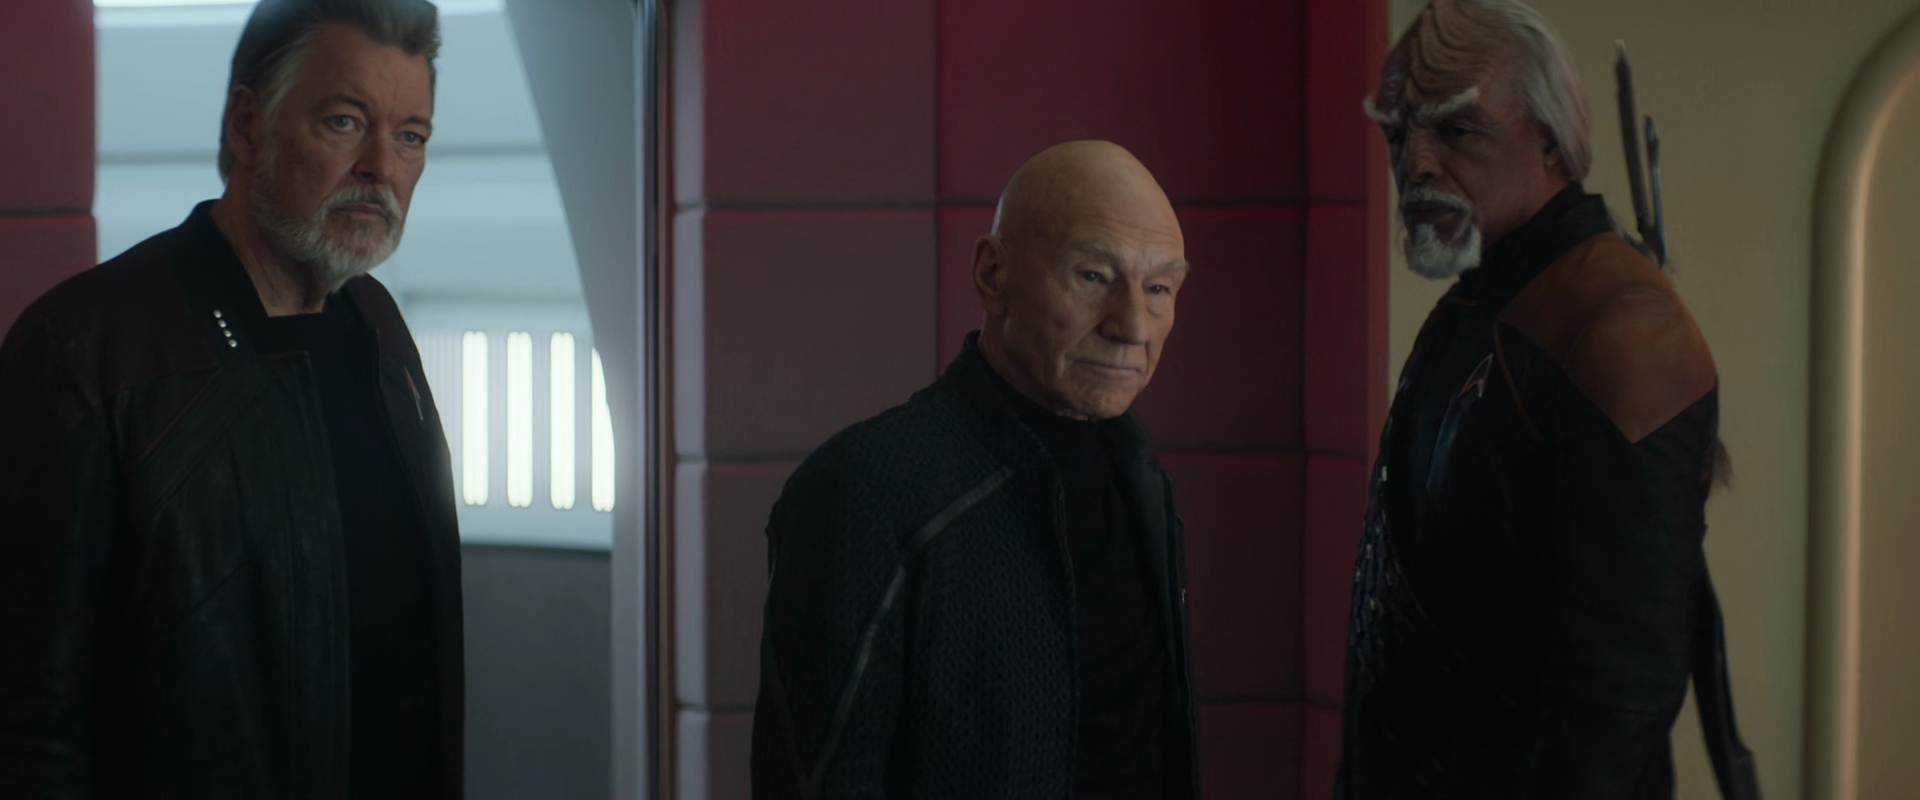 Riker (Jonathan Frakes), Picard (Patrick Stewart) and Worf (Michael Dorn) set out to infiltrate Daystrom Station in The Enterprise successfully makes its way to the heart of the Borg Cube in Star Trek: Picard Season 3 Episode 10 "Et in Arcadia Ego: Part 2" (2023), Paramount